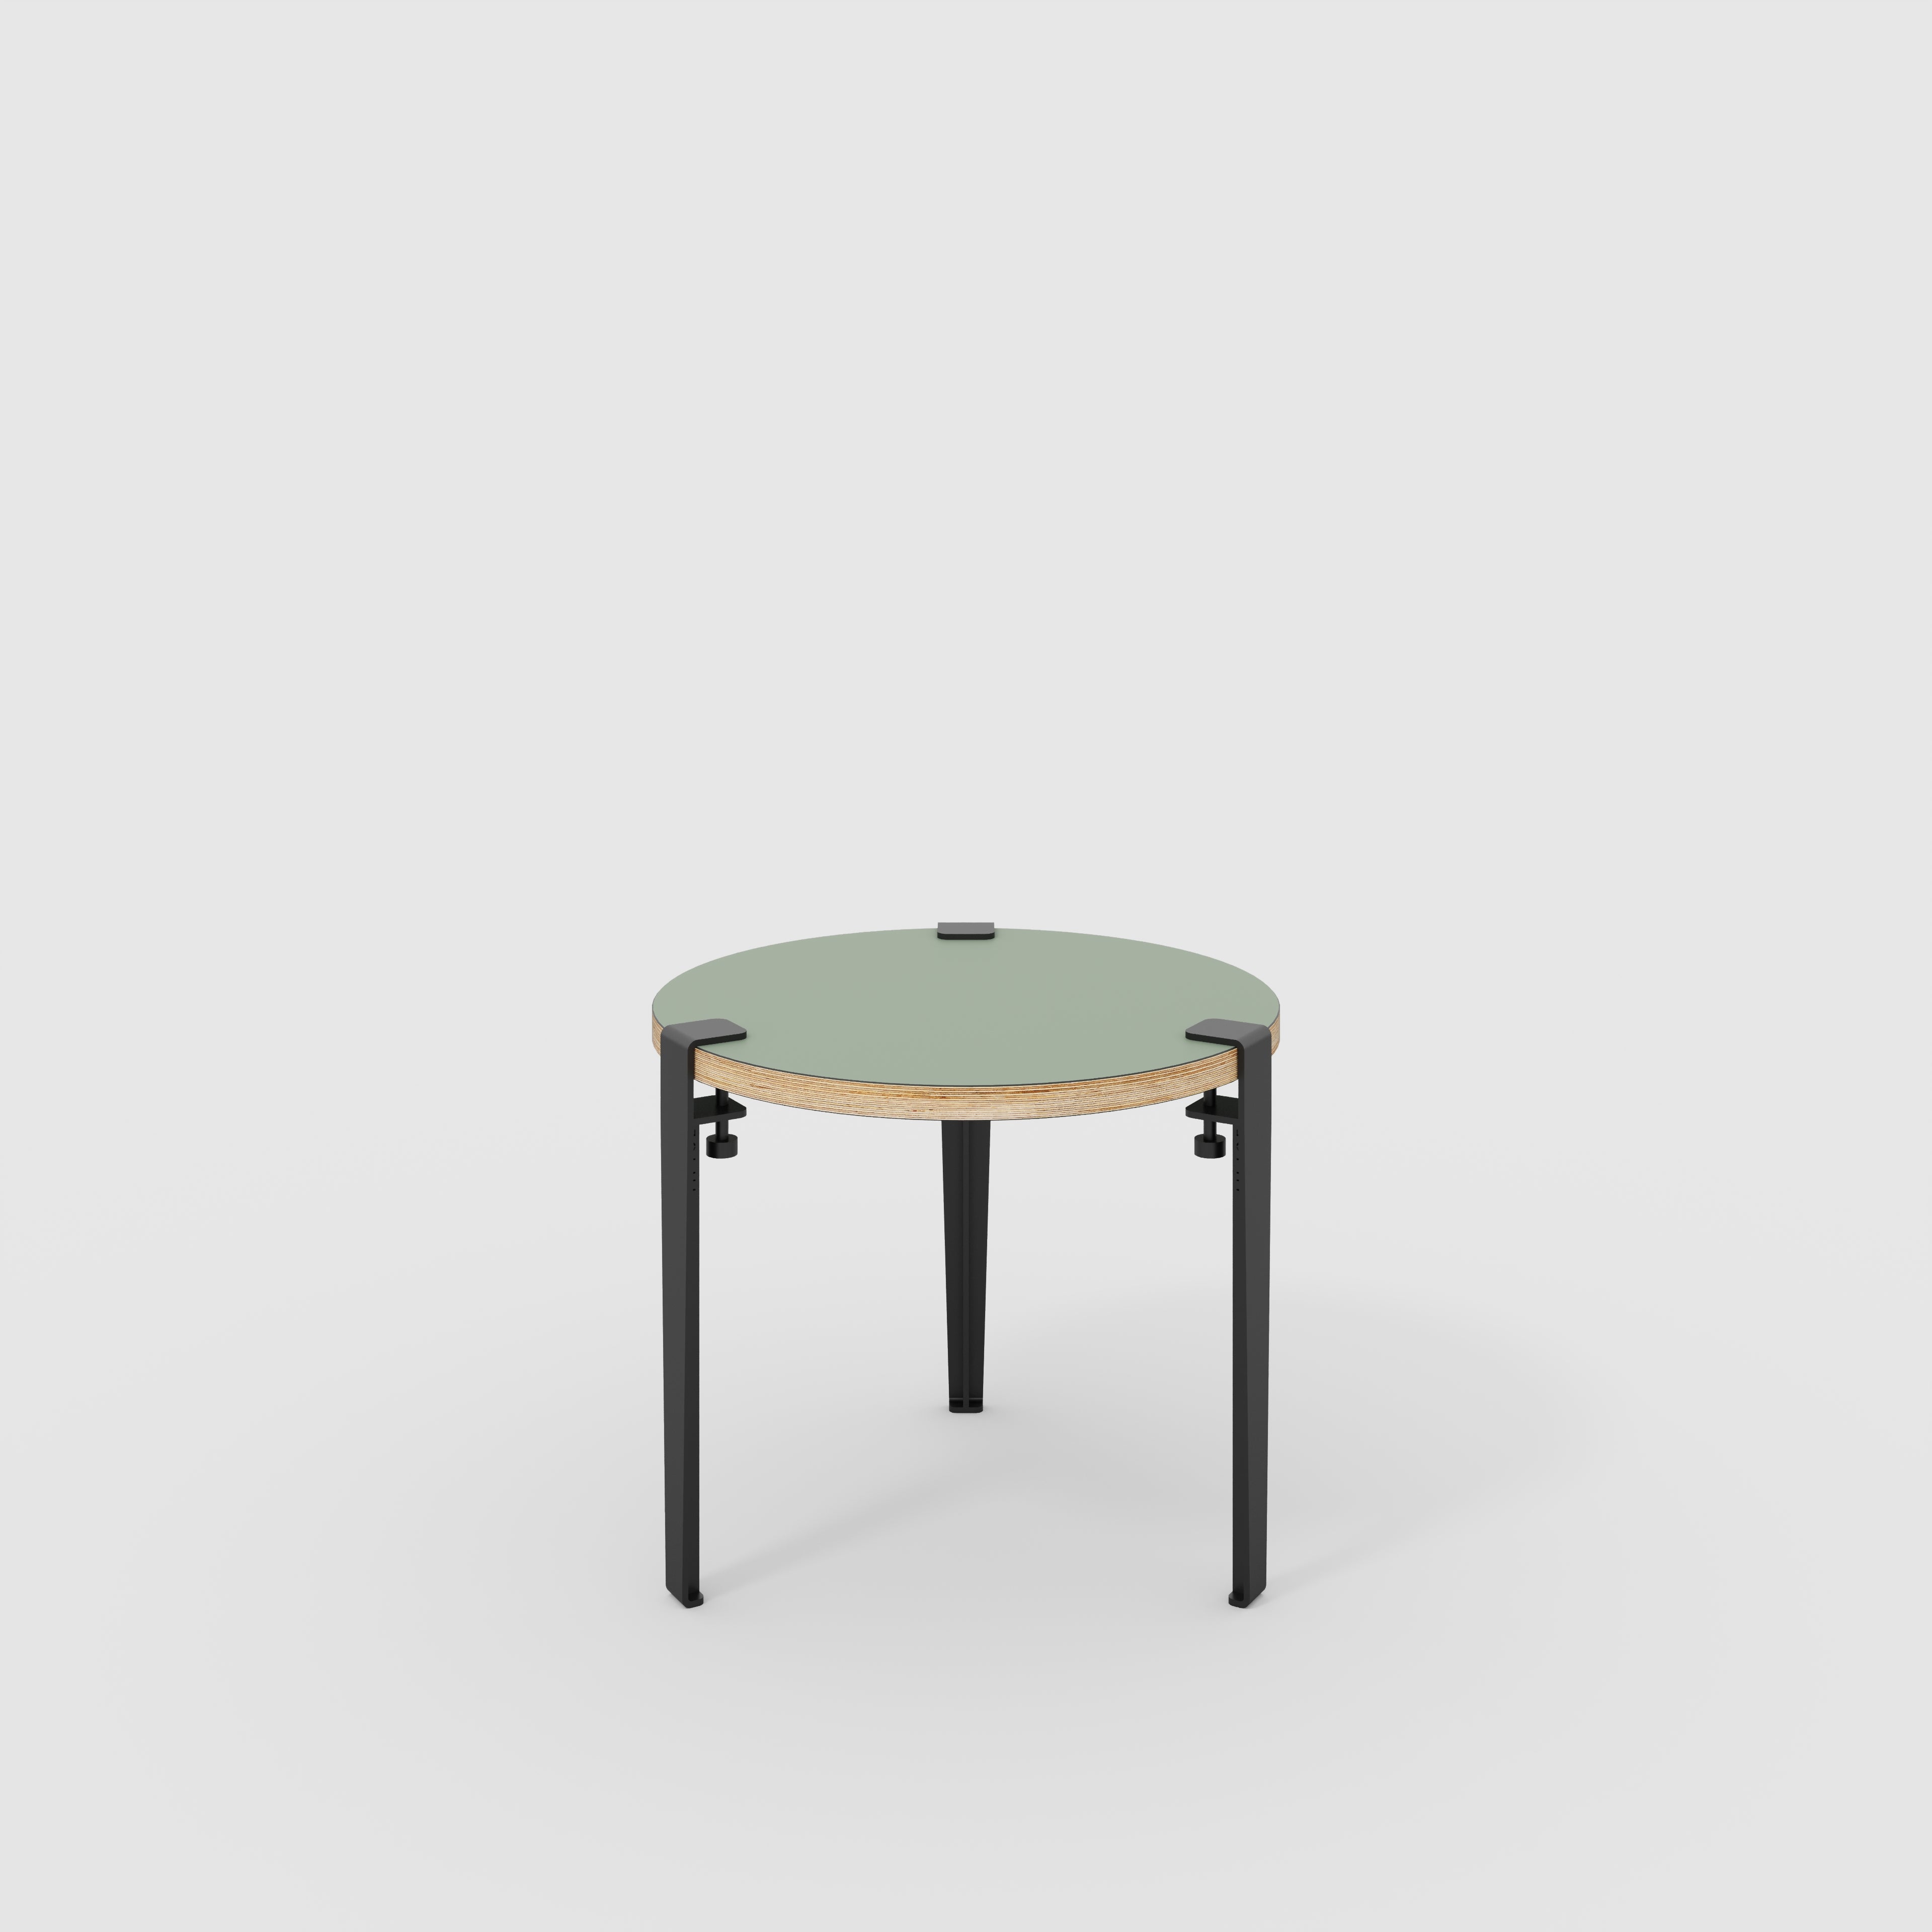 Round Side Table with Black Tiptoe Legs - Formica Green Slate - 500(dia) x 430(h)